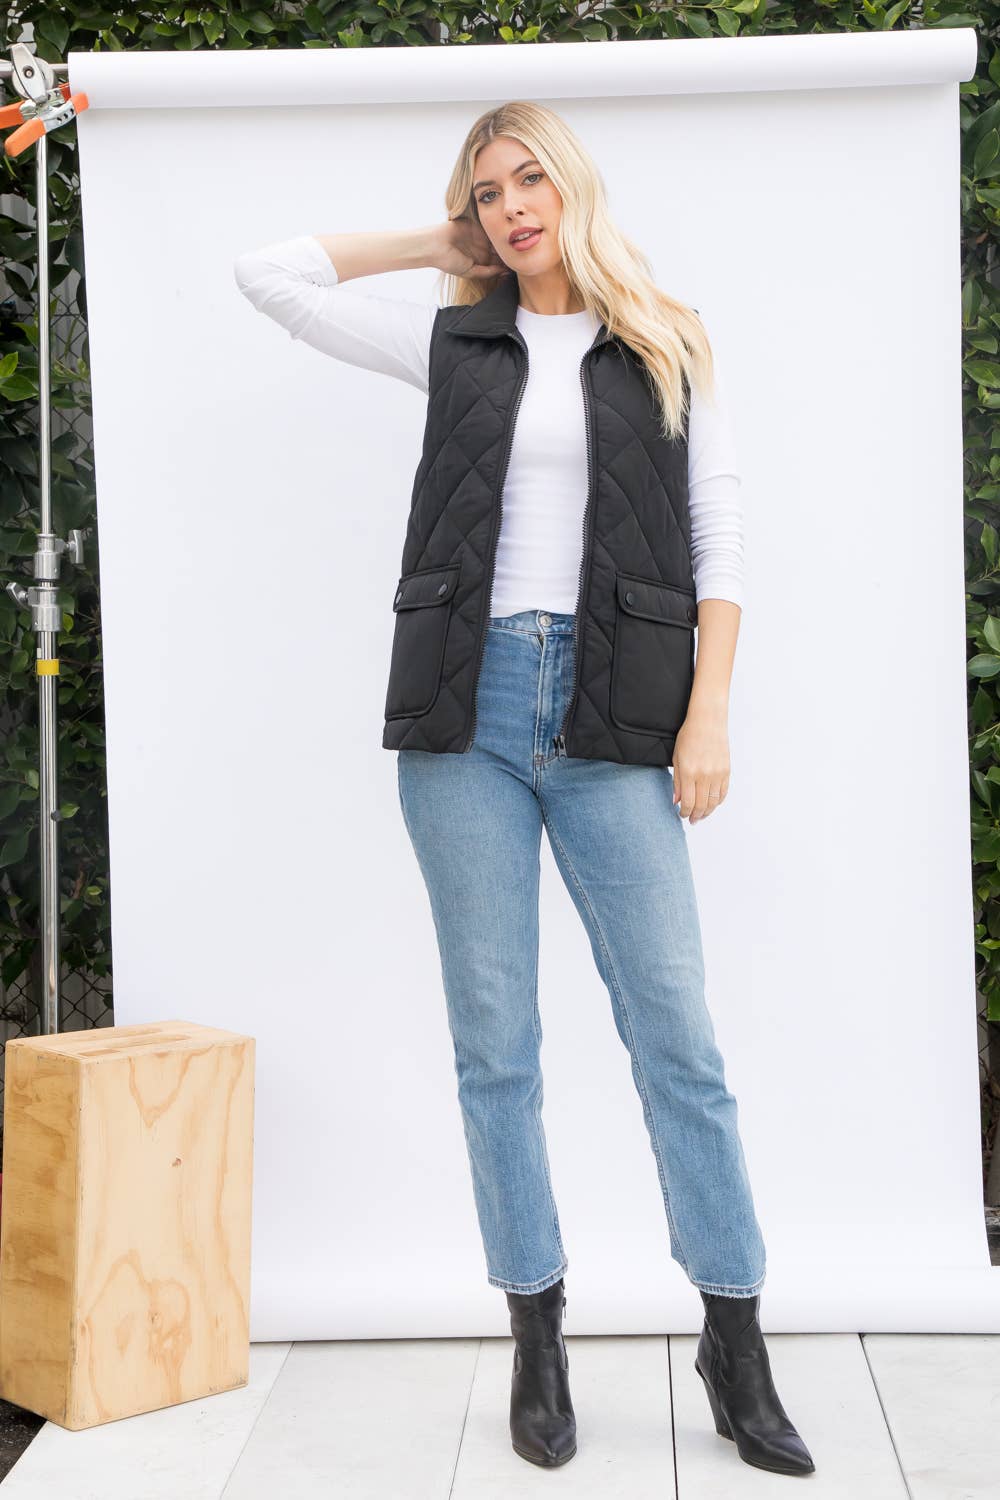 Light Weight Polyfill Quilted Vest: Black by 26 International